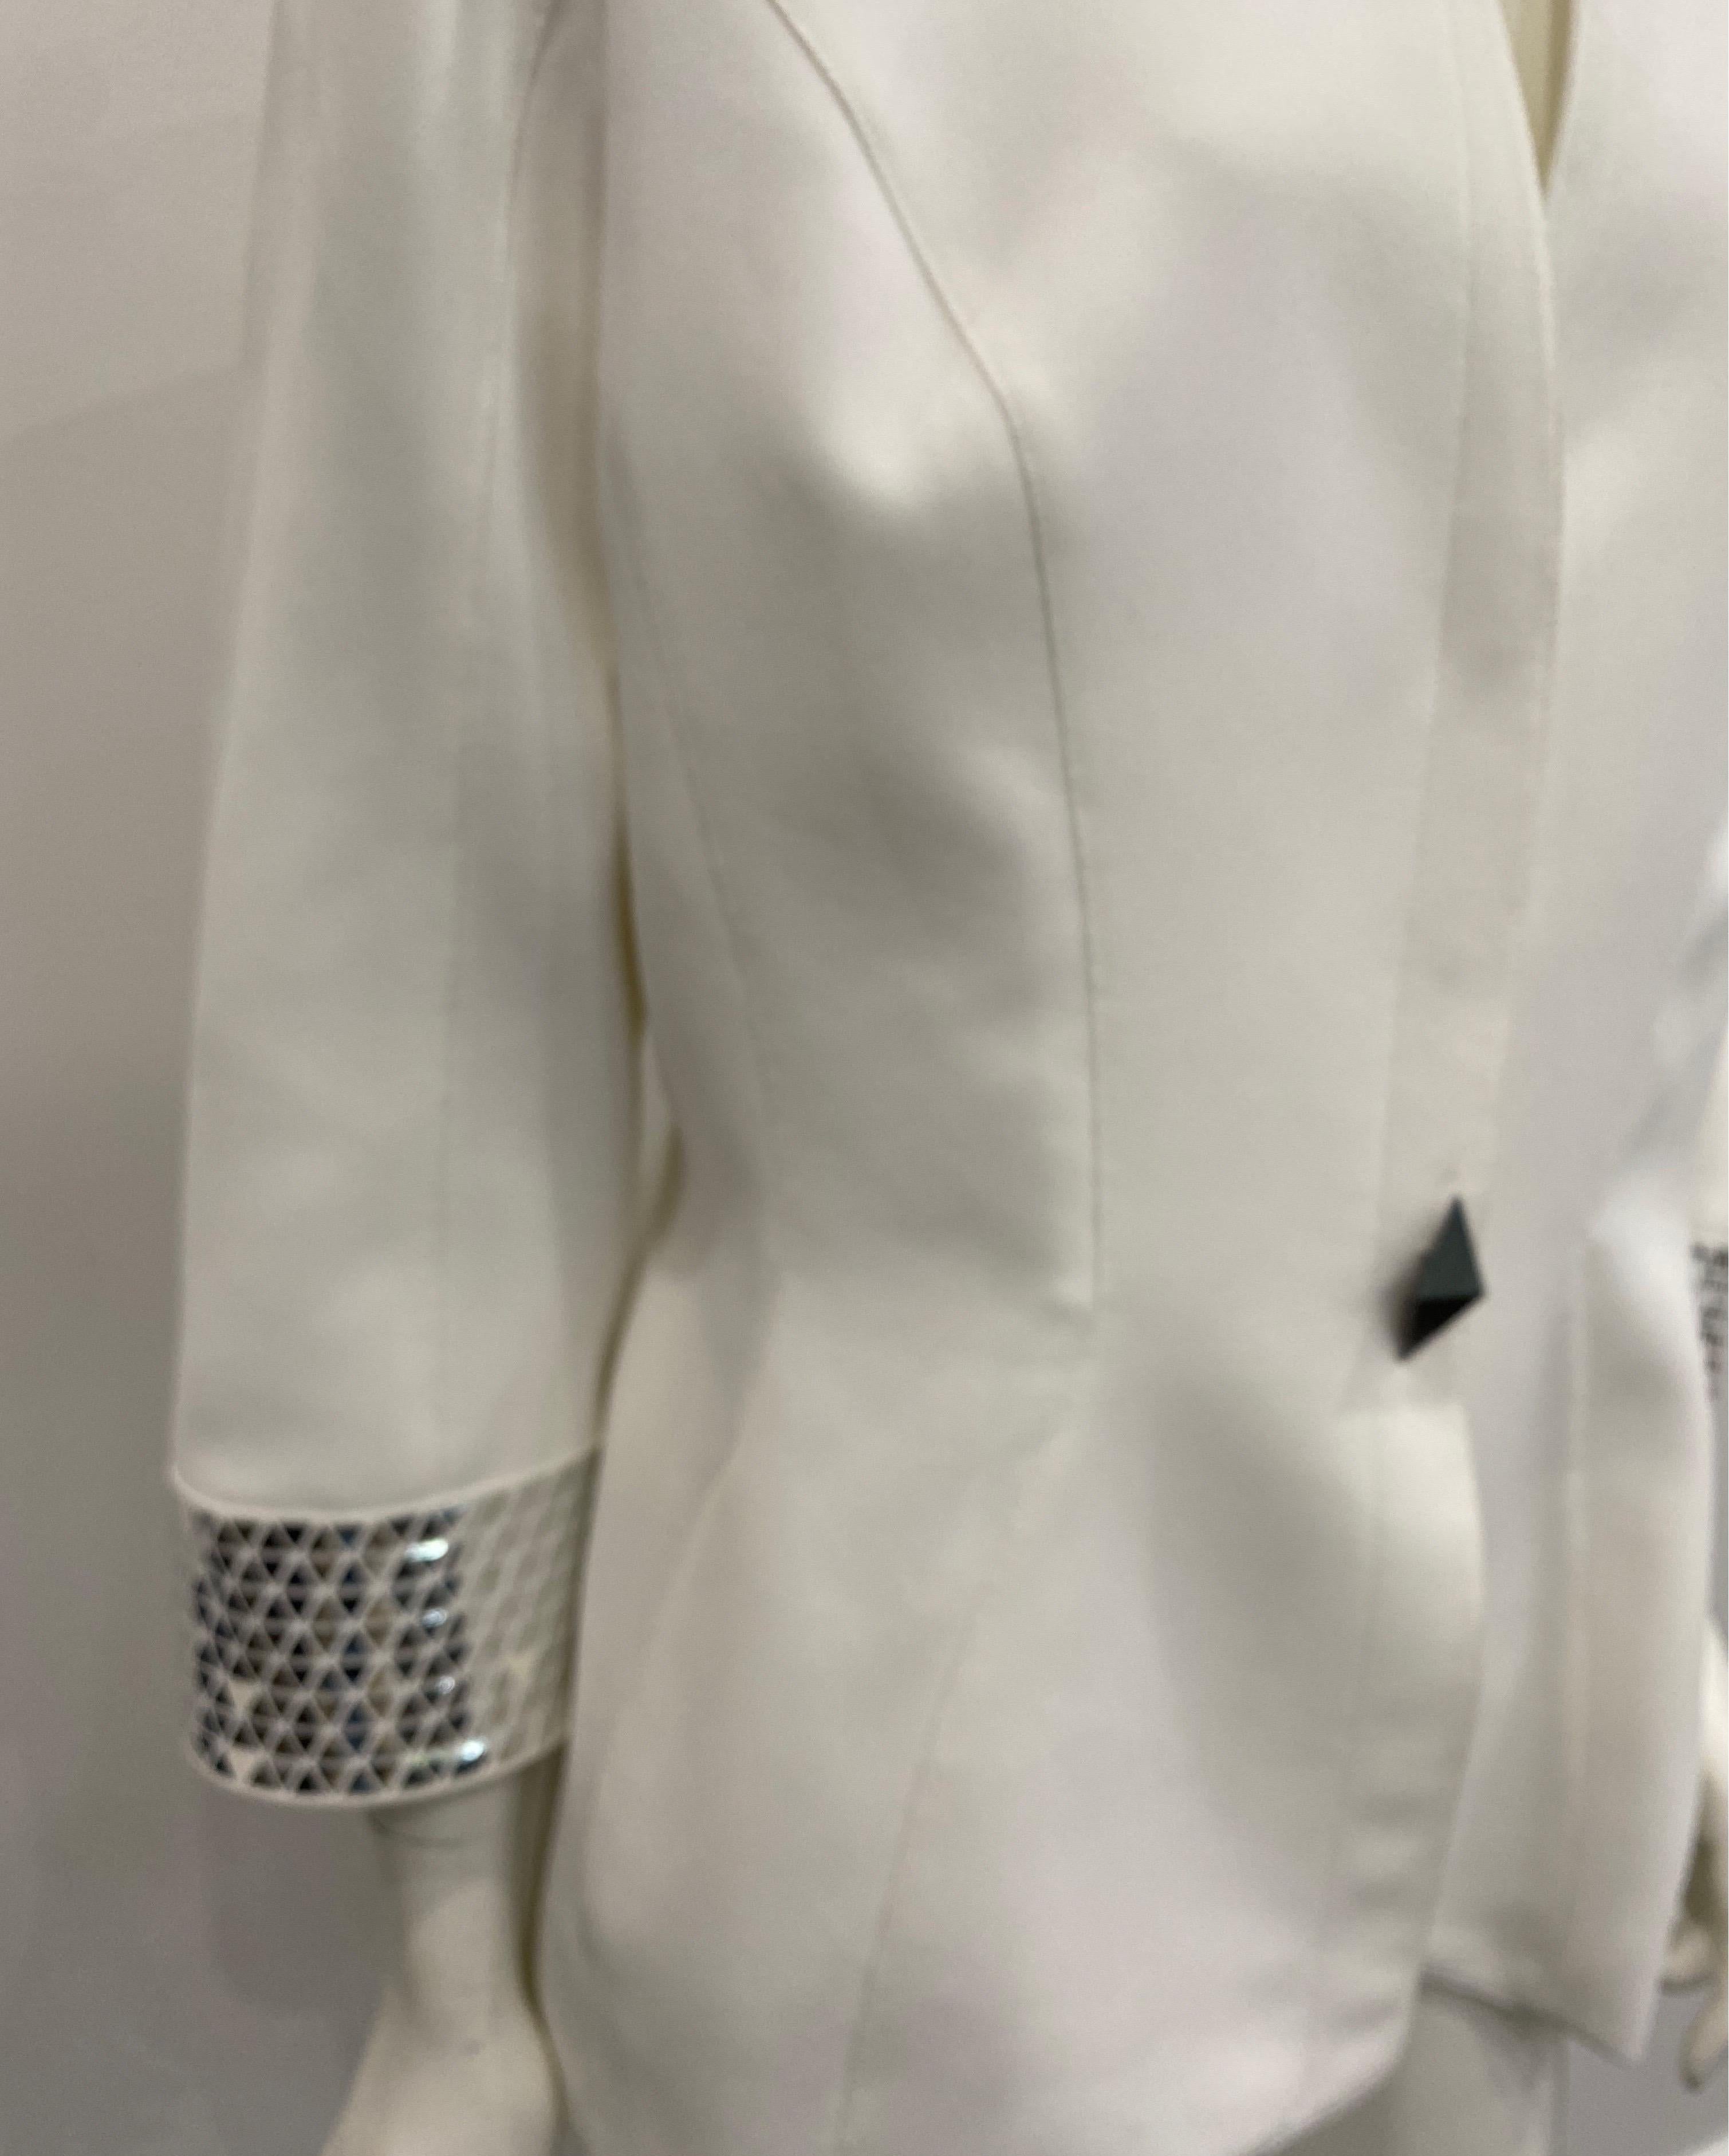 Women's Thierry Mugler Couture 1990s White Jacket with Silver metallic details - Size 46 For Sale